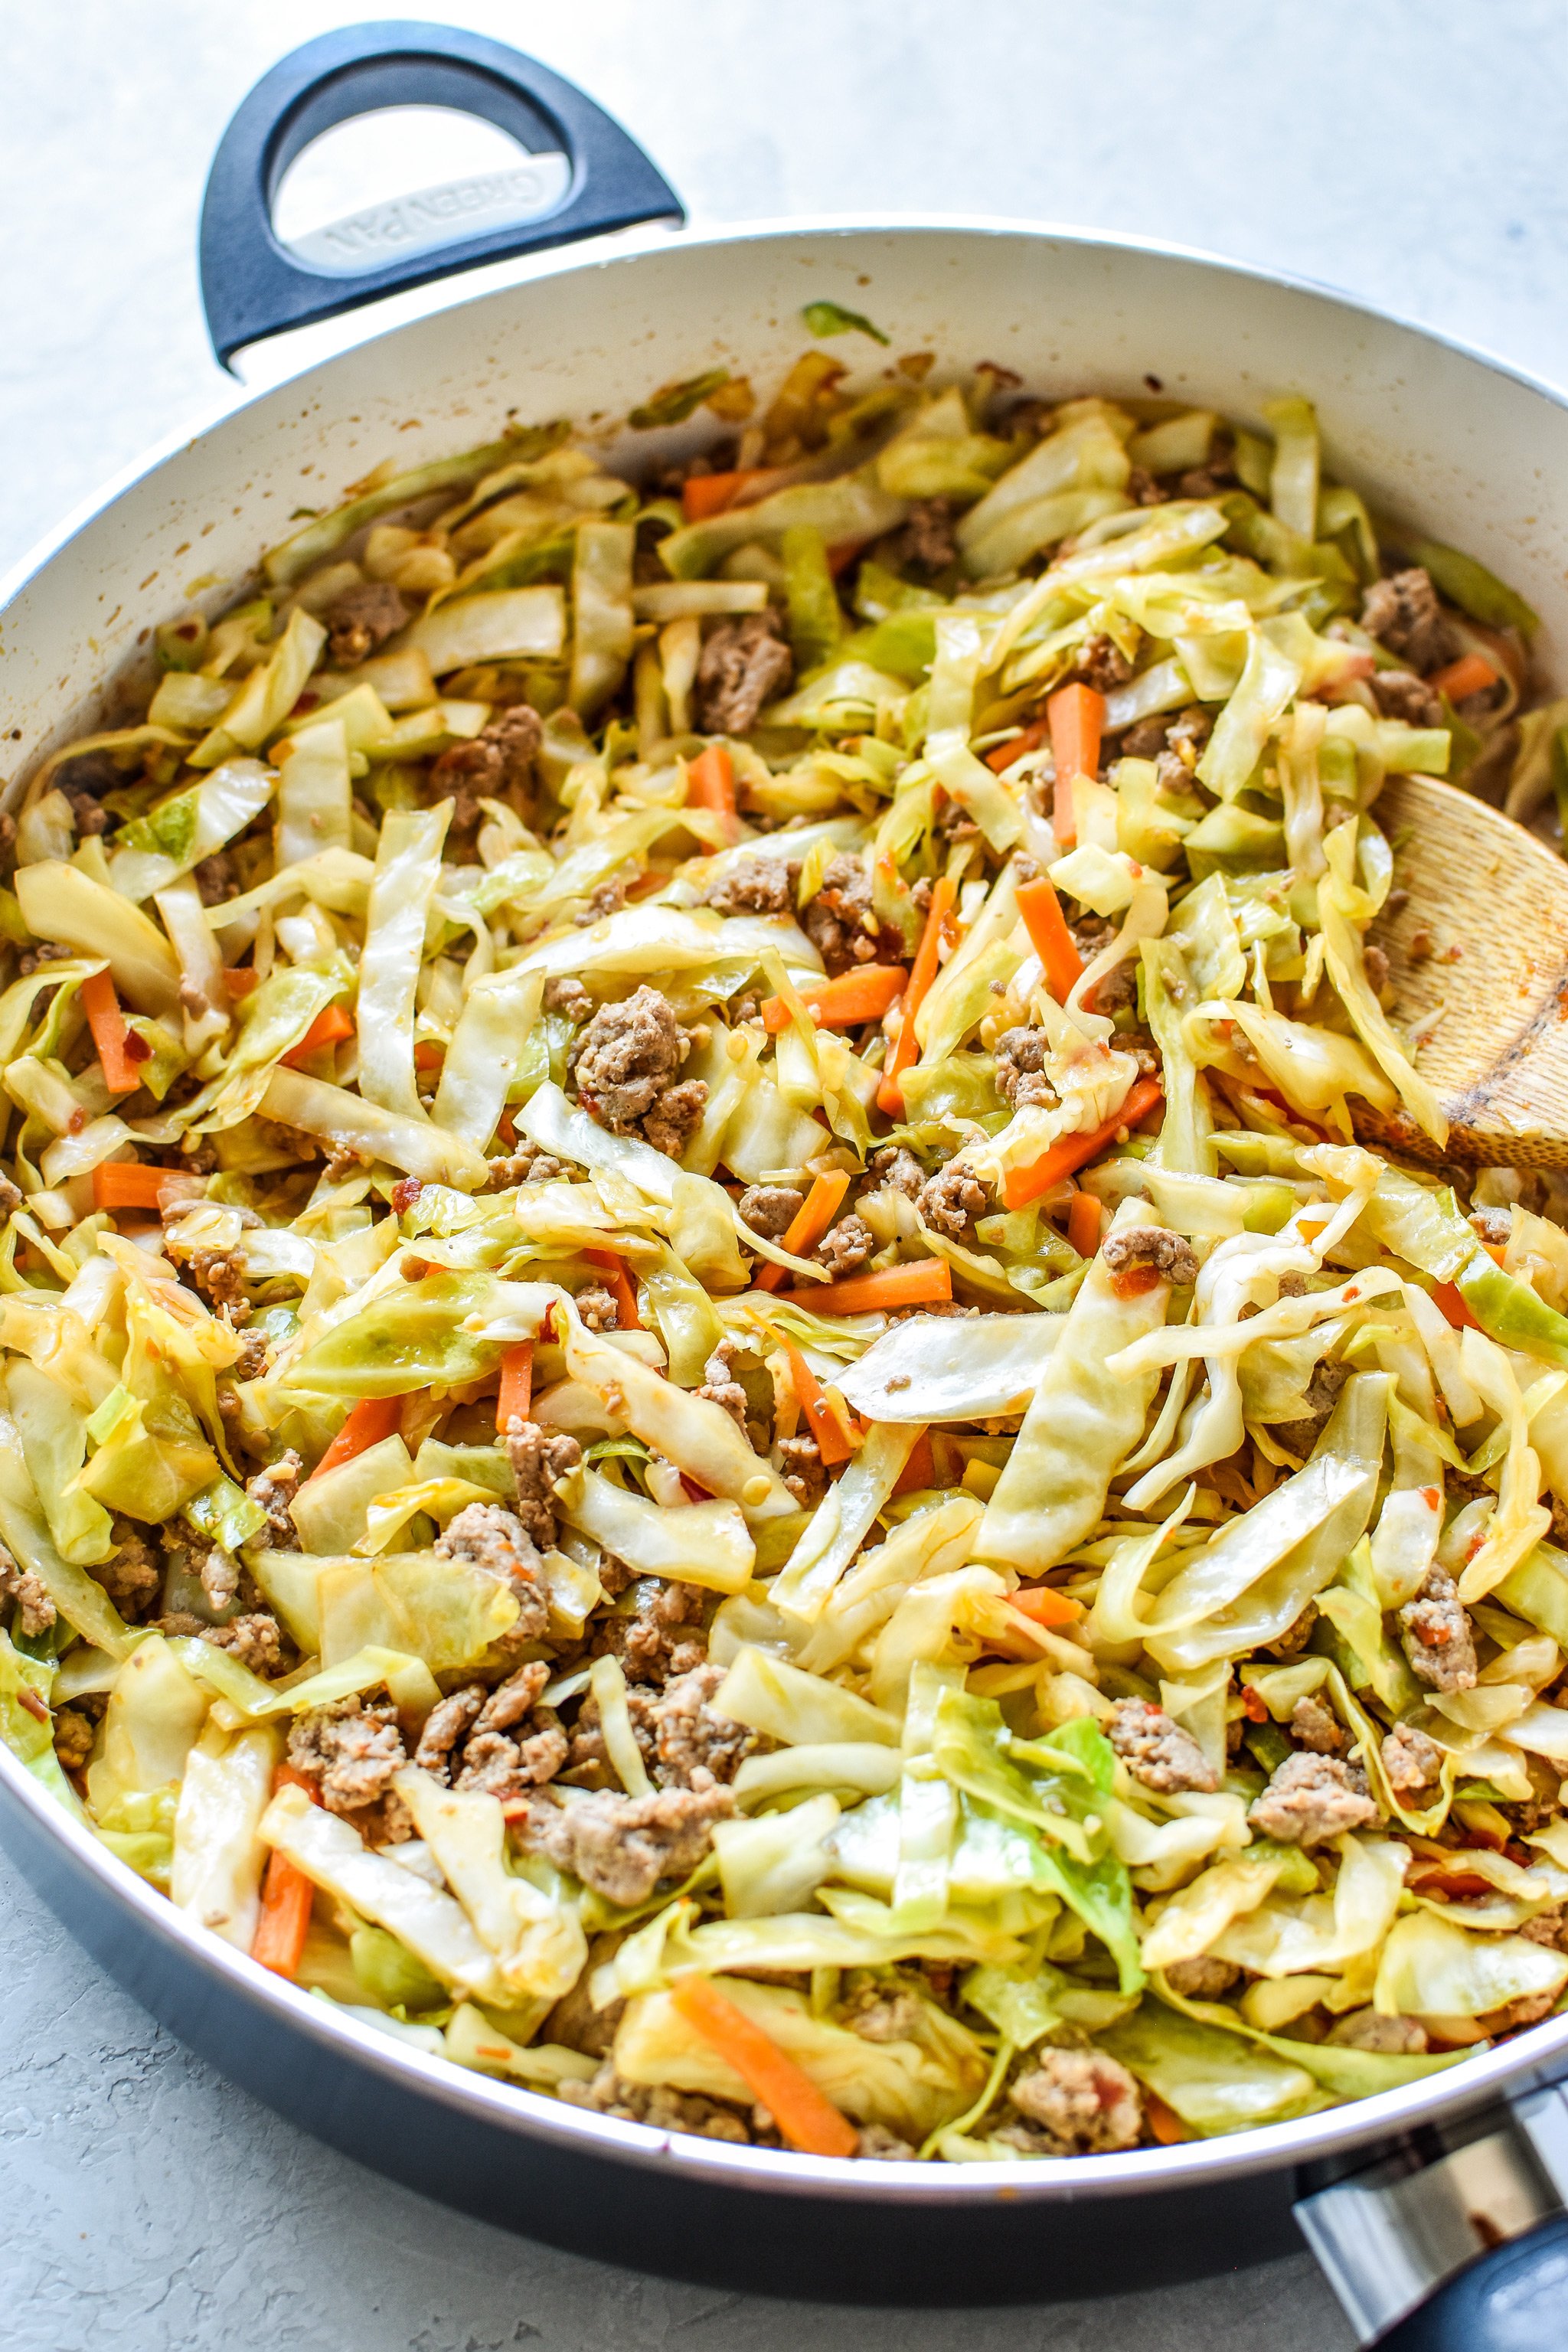 Spicy Ground Turkey & Cabbage Stir Fry Meal Prep - Project Meal Plan